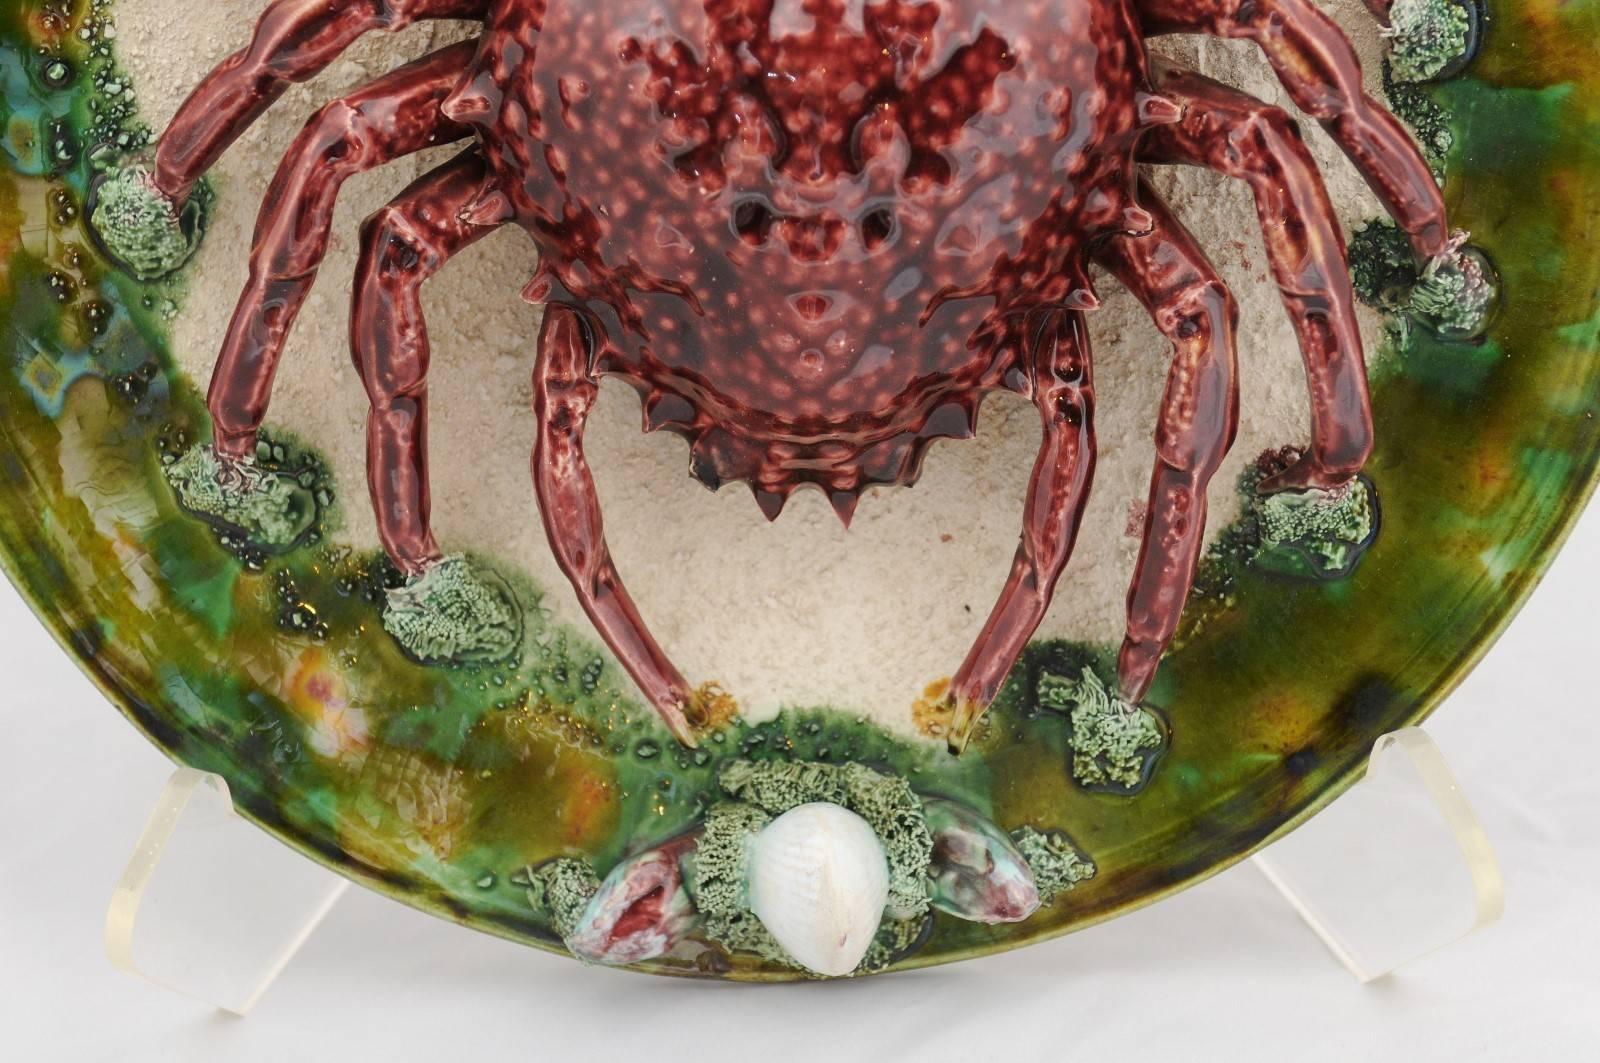 Portuguese Palissy Style Majolica Plate with Red Sea Spider in High Relief, circa 1950